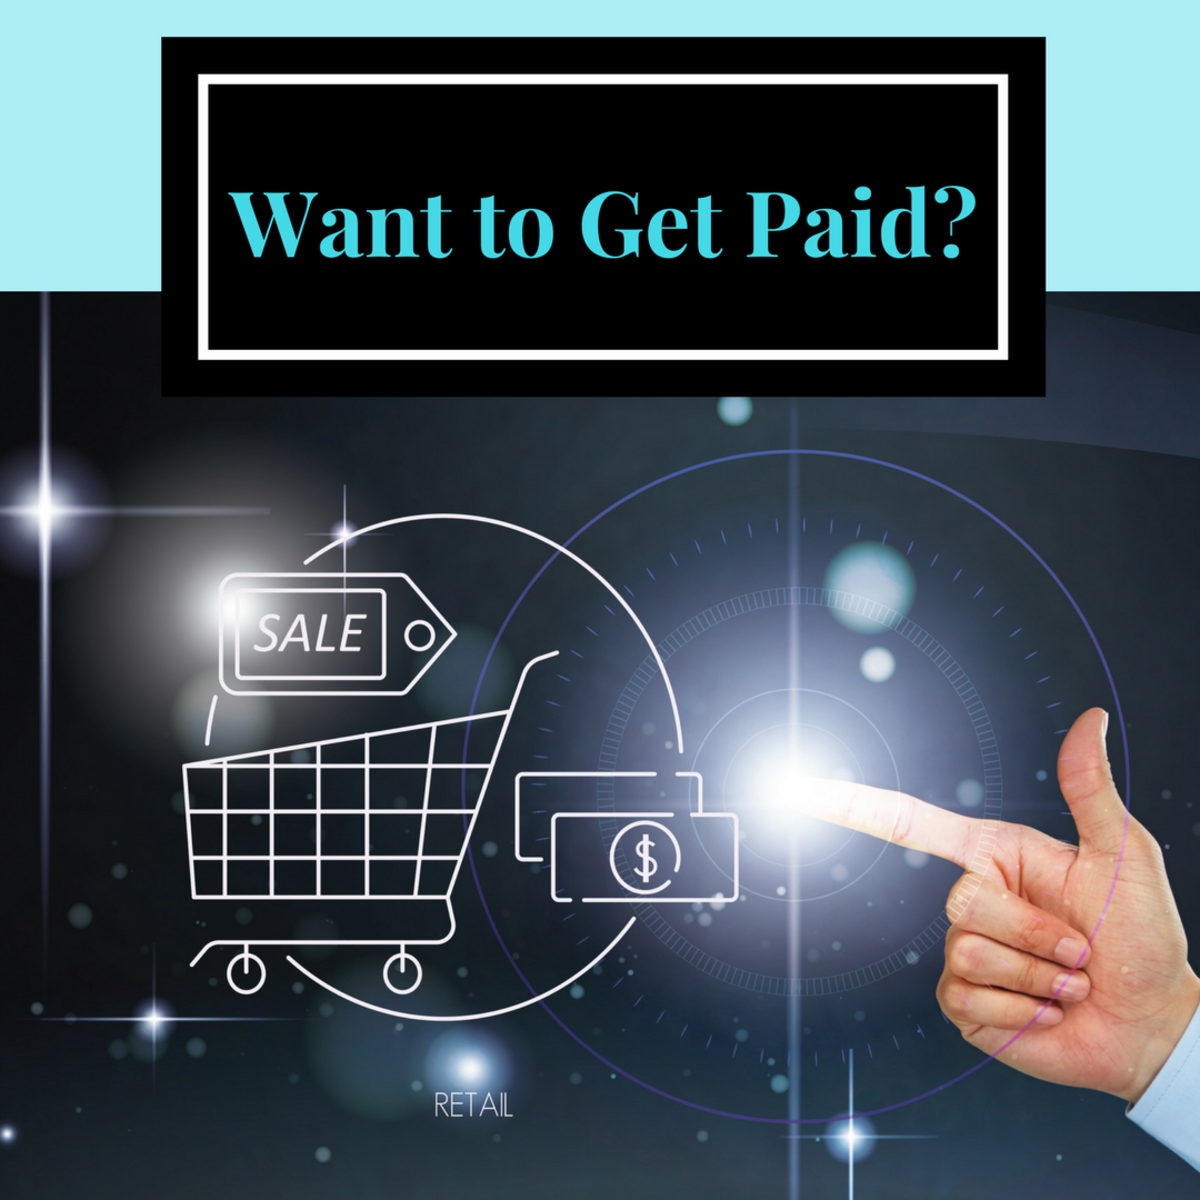 Want to get paid?